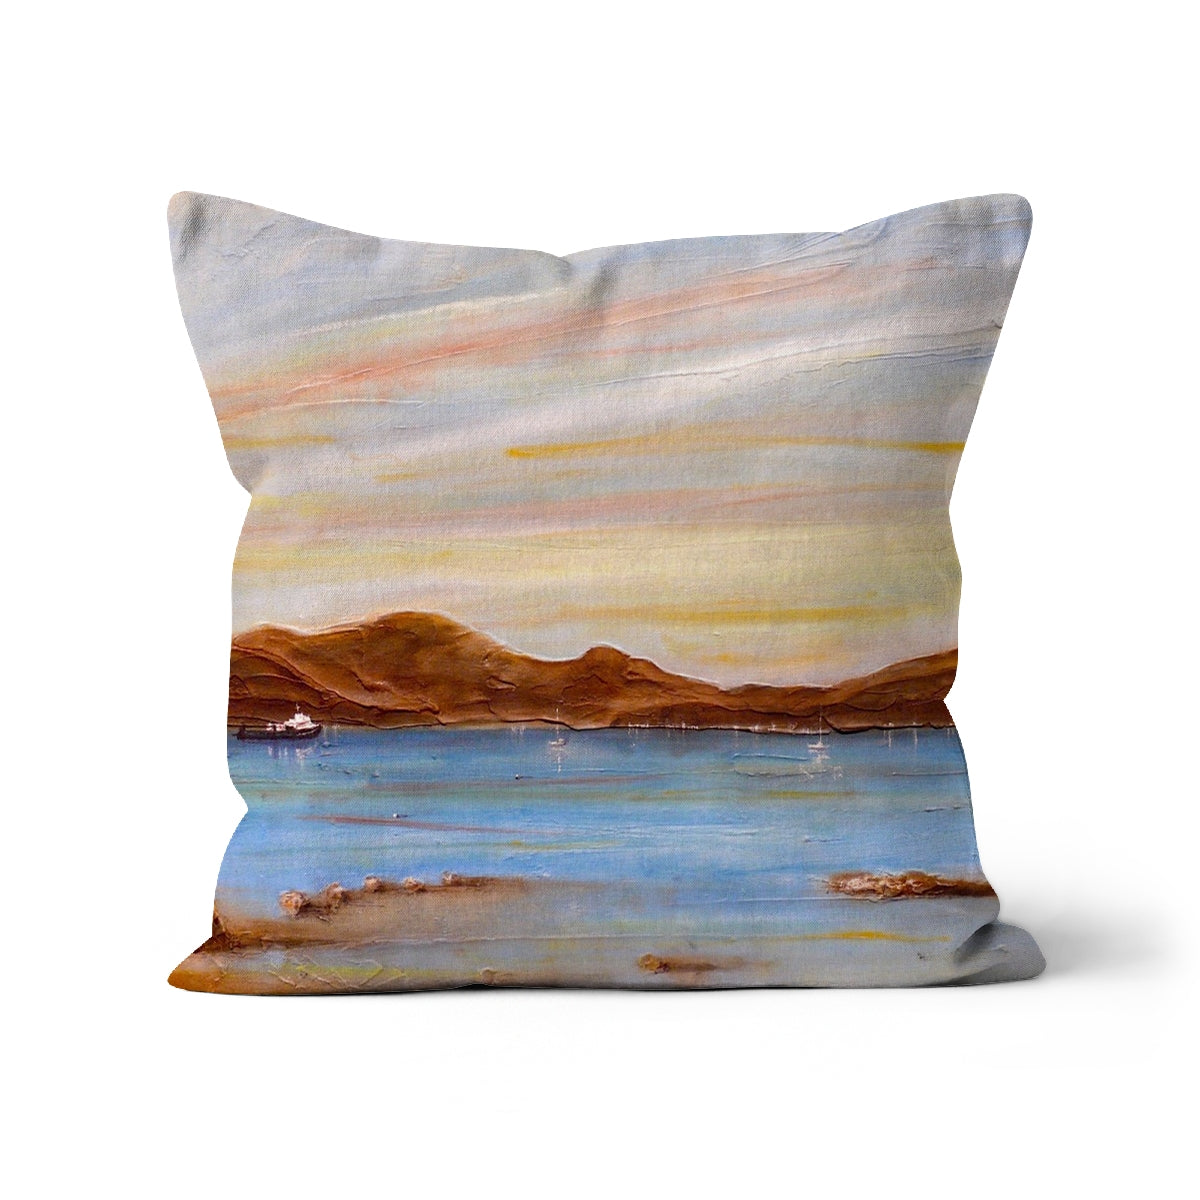 The Last Ferry To Dunoon Art Gifts Cushion-Cushions-River Clyde Art Gallery-Canvas-16"x16"-Paintings, Prints, Homeware, Art Gifts From Scotland By Scottish Artist Kevin Hunter